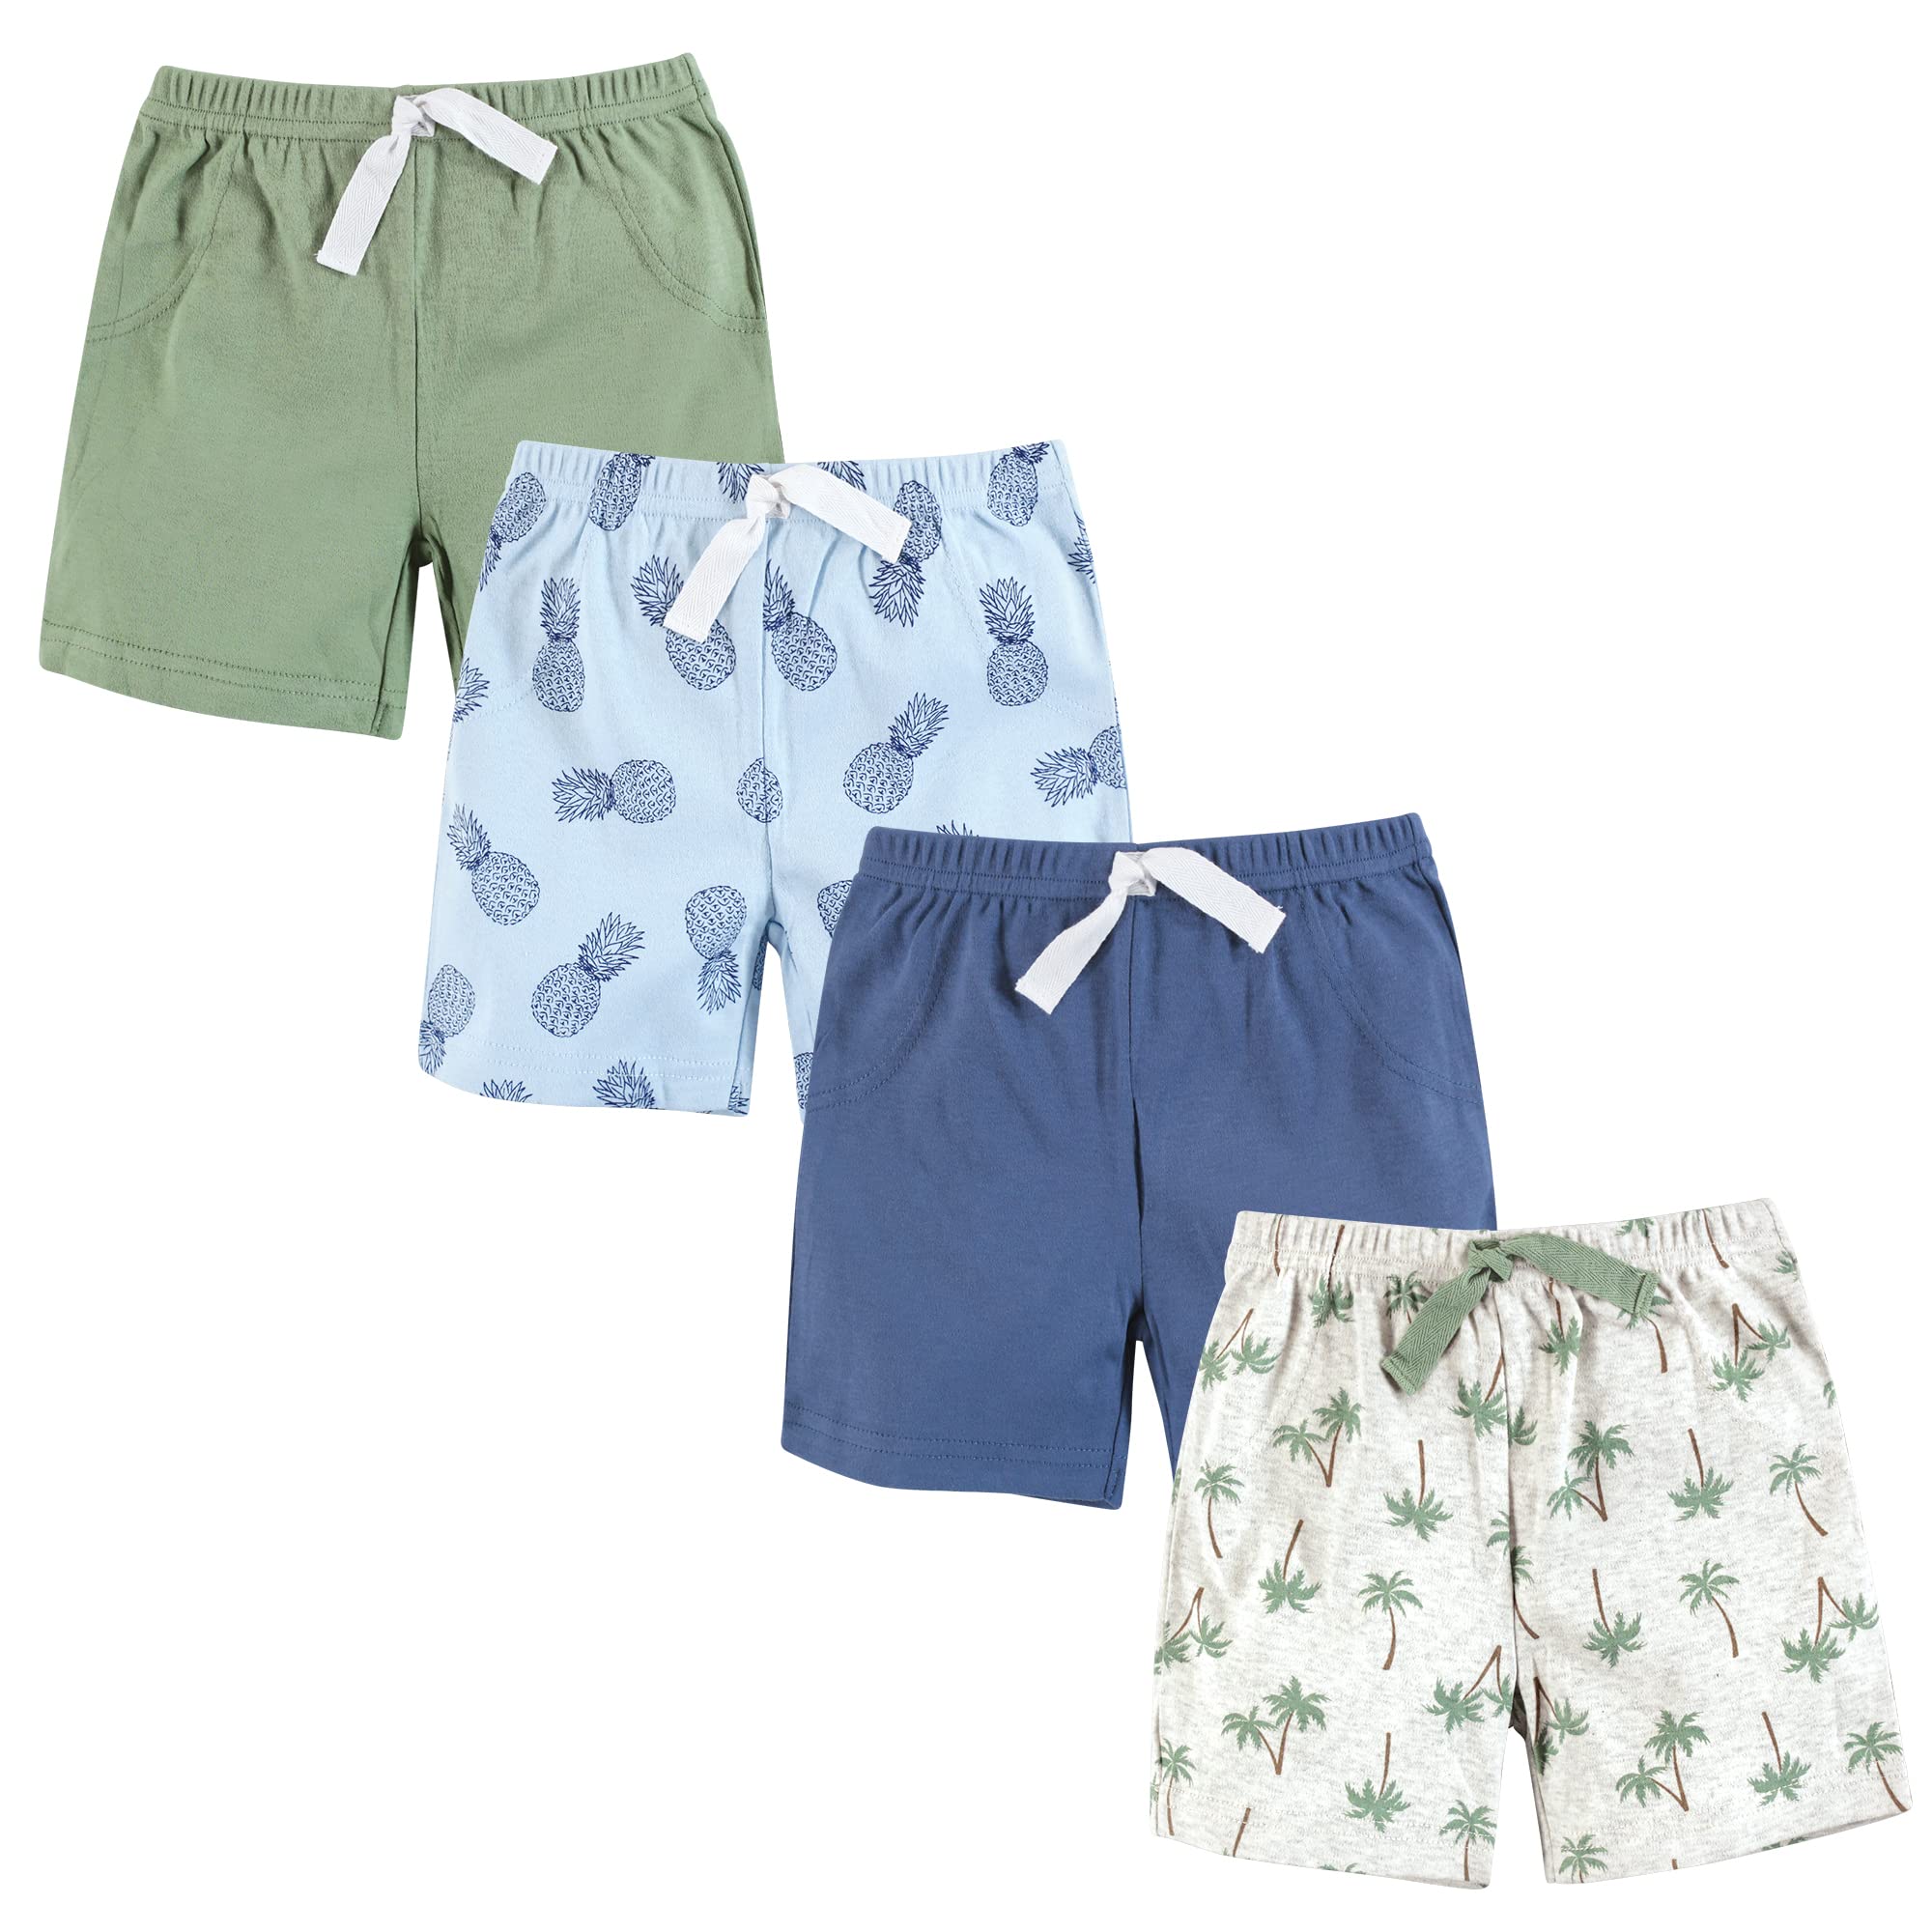 Hudson Baby Unisex Baby and Toddler Shorts Bottoms 4-Pack, Palm Tree, 5 Toddler